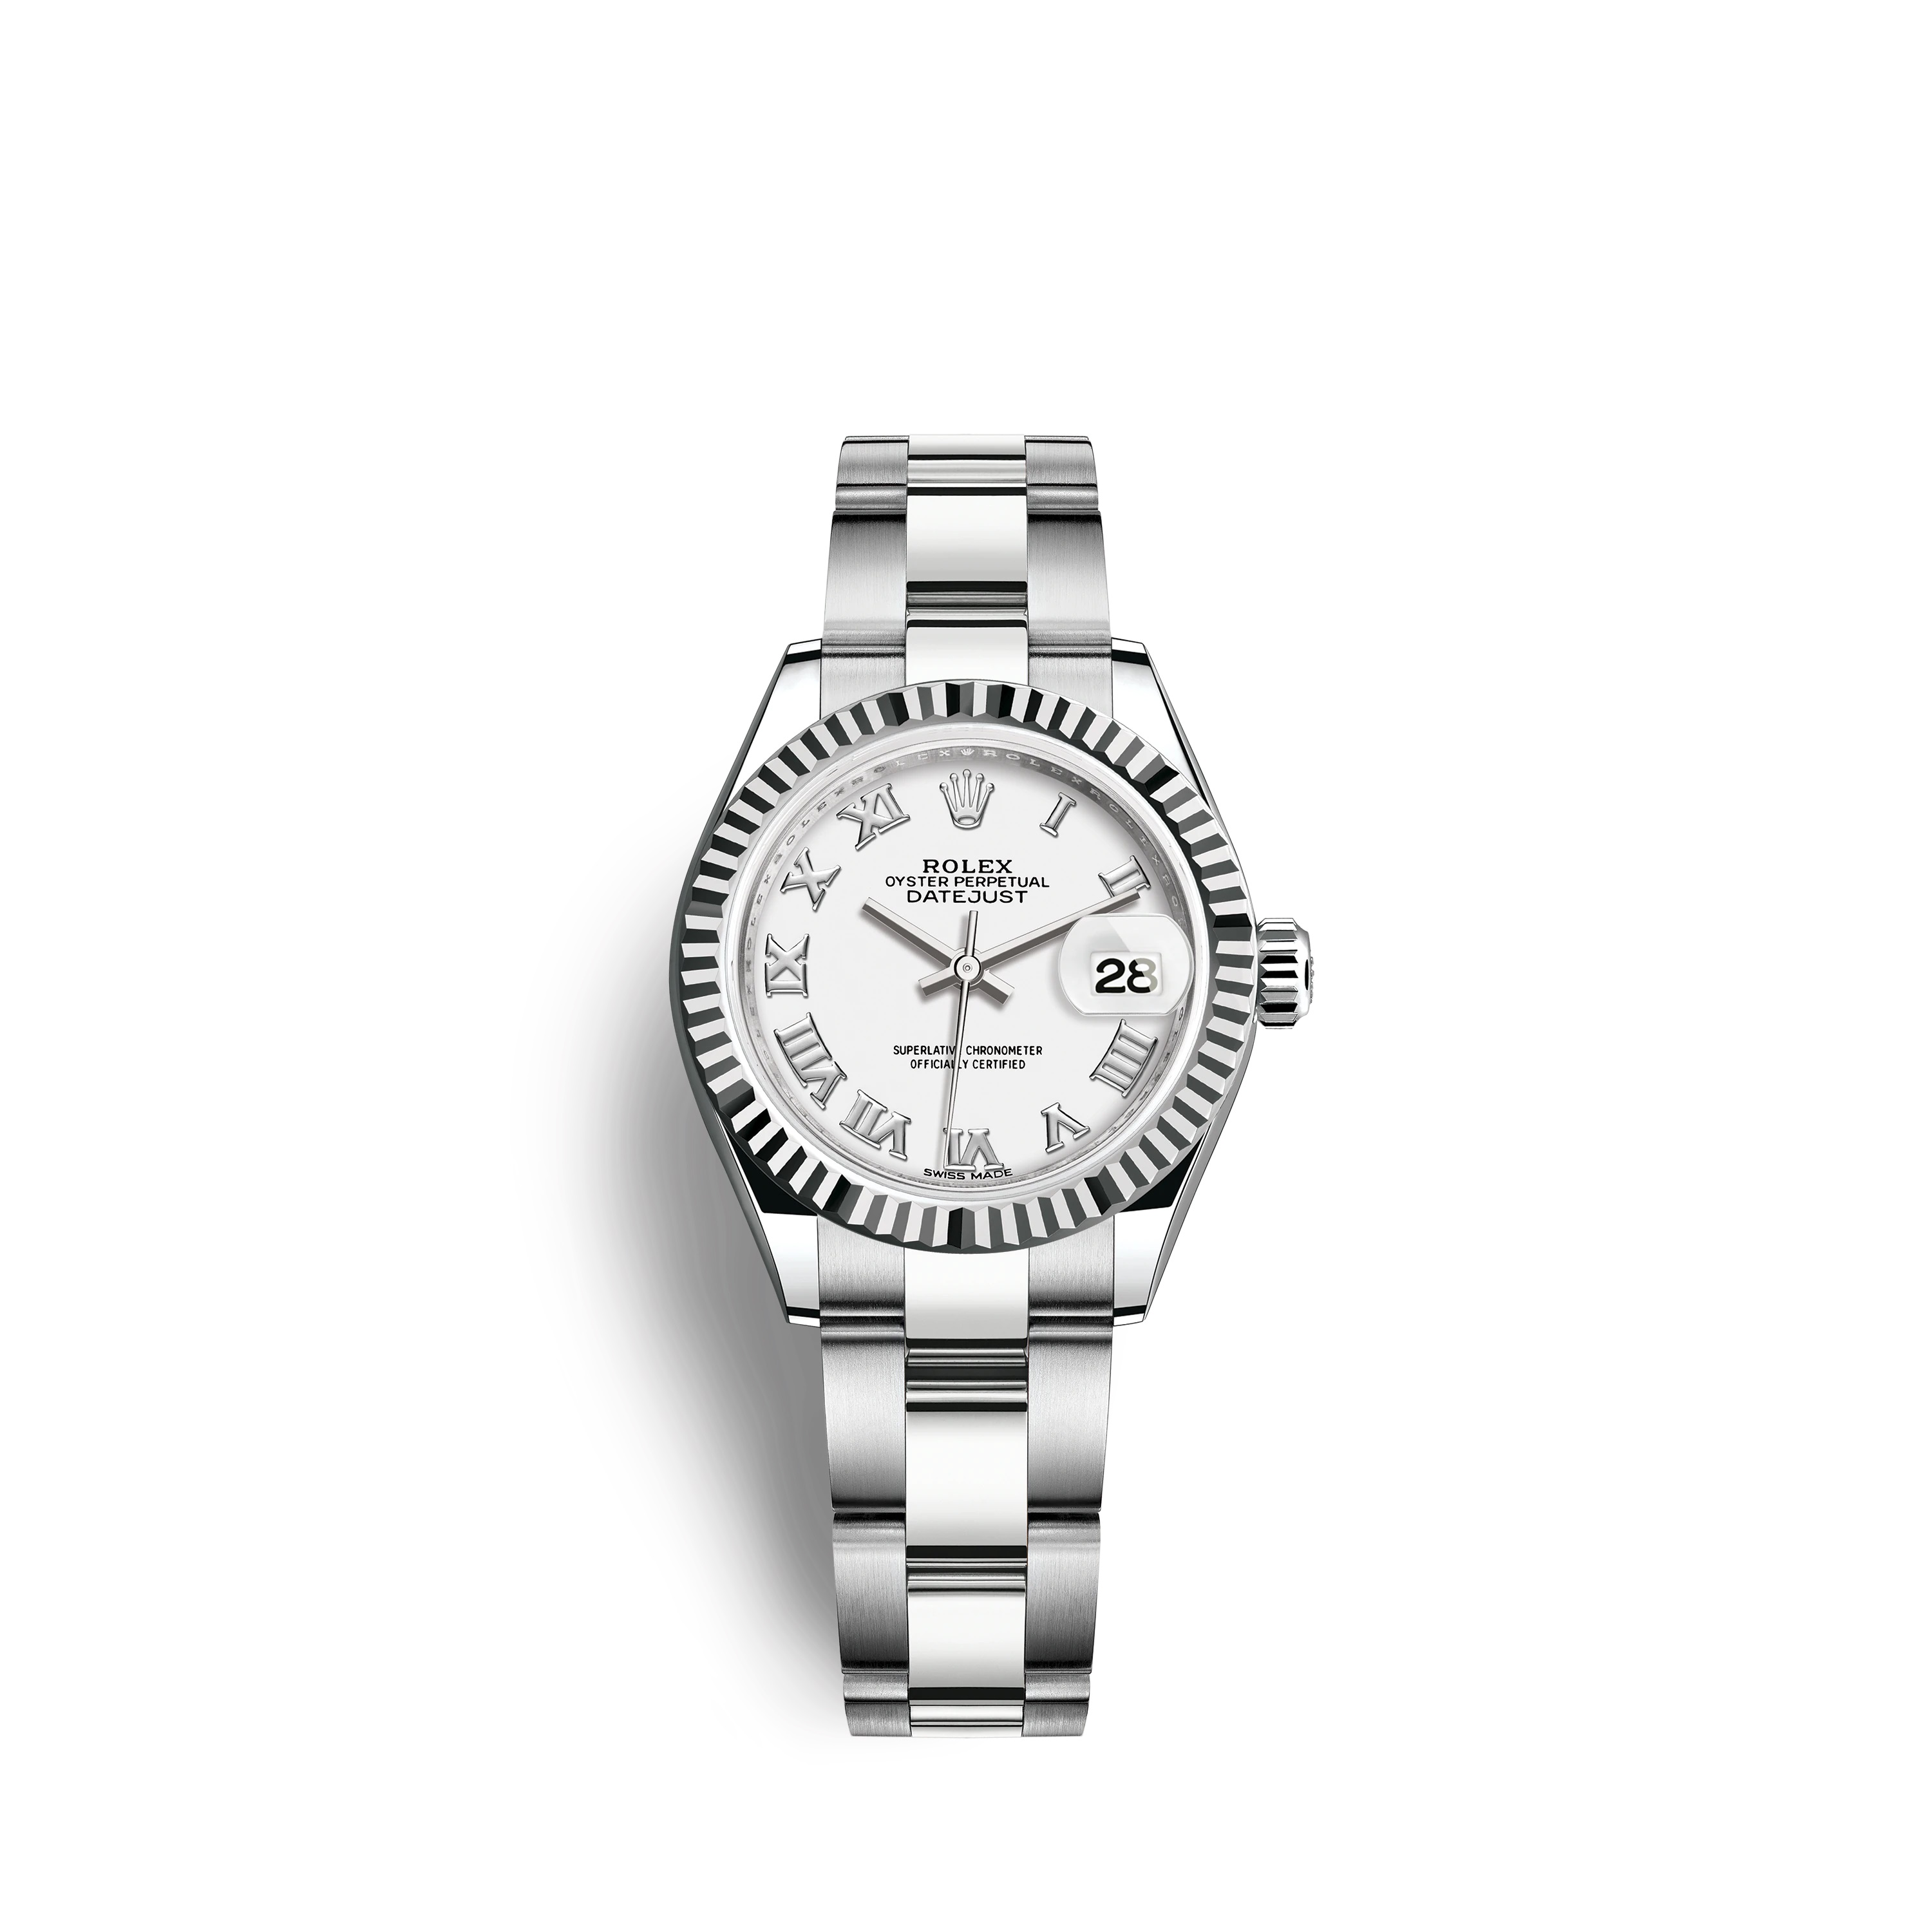 Lady-Datejust 28 279174 White Gold & Stainless Steel Watch (White)